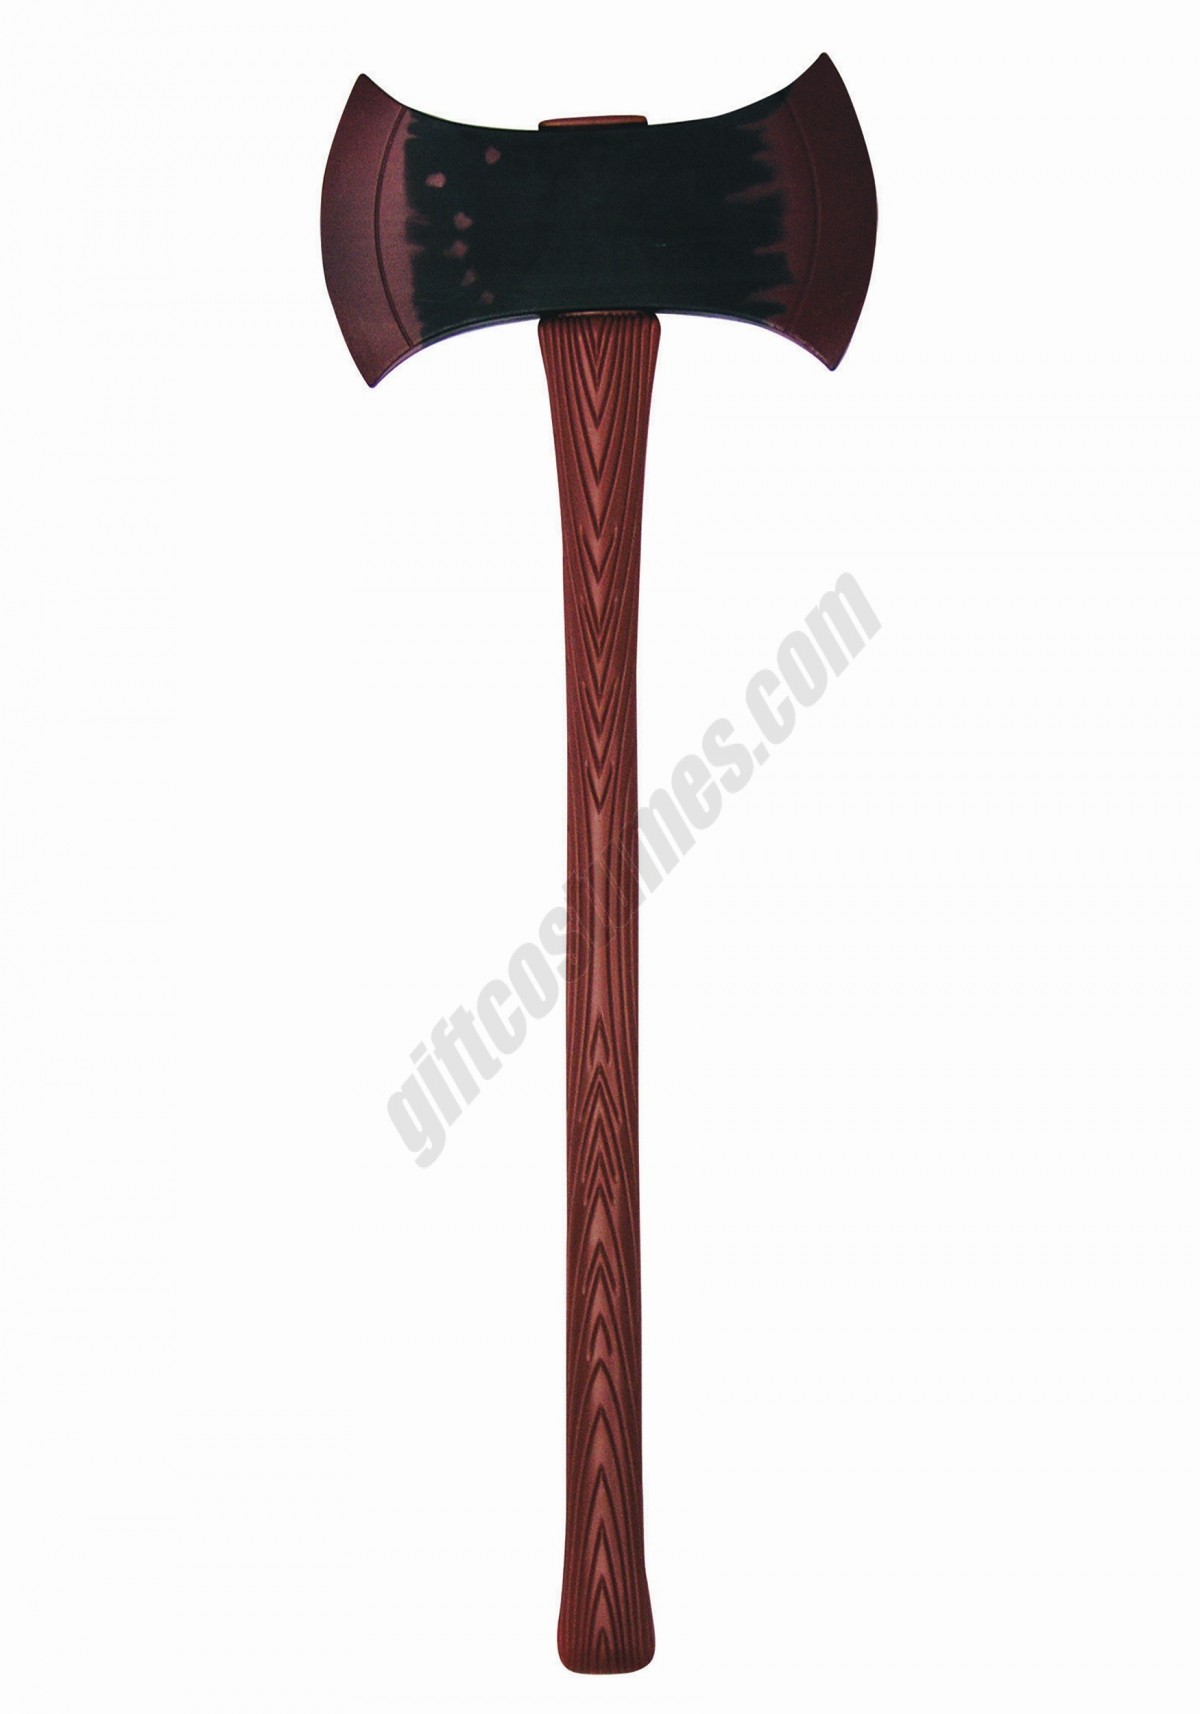 Giant Double Blade Axe Promotions - -0